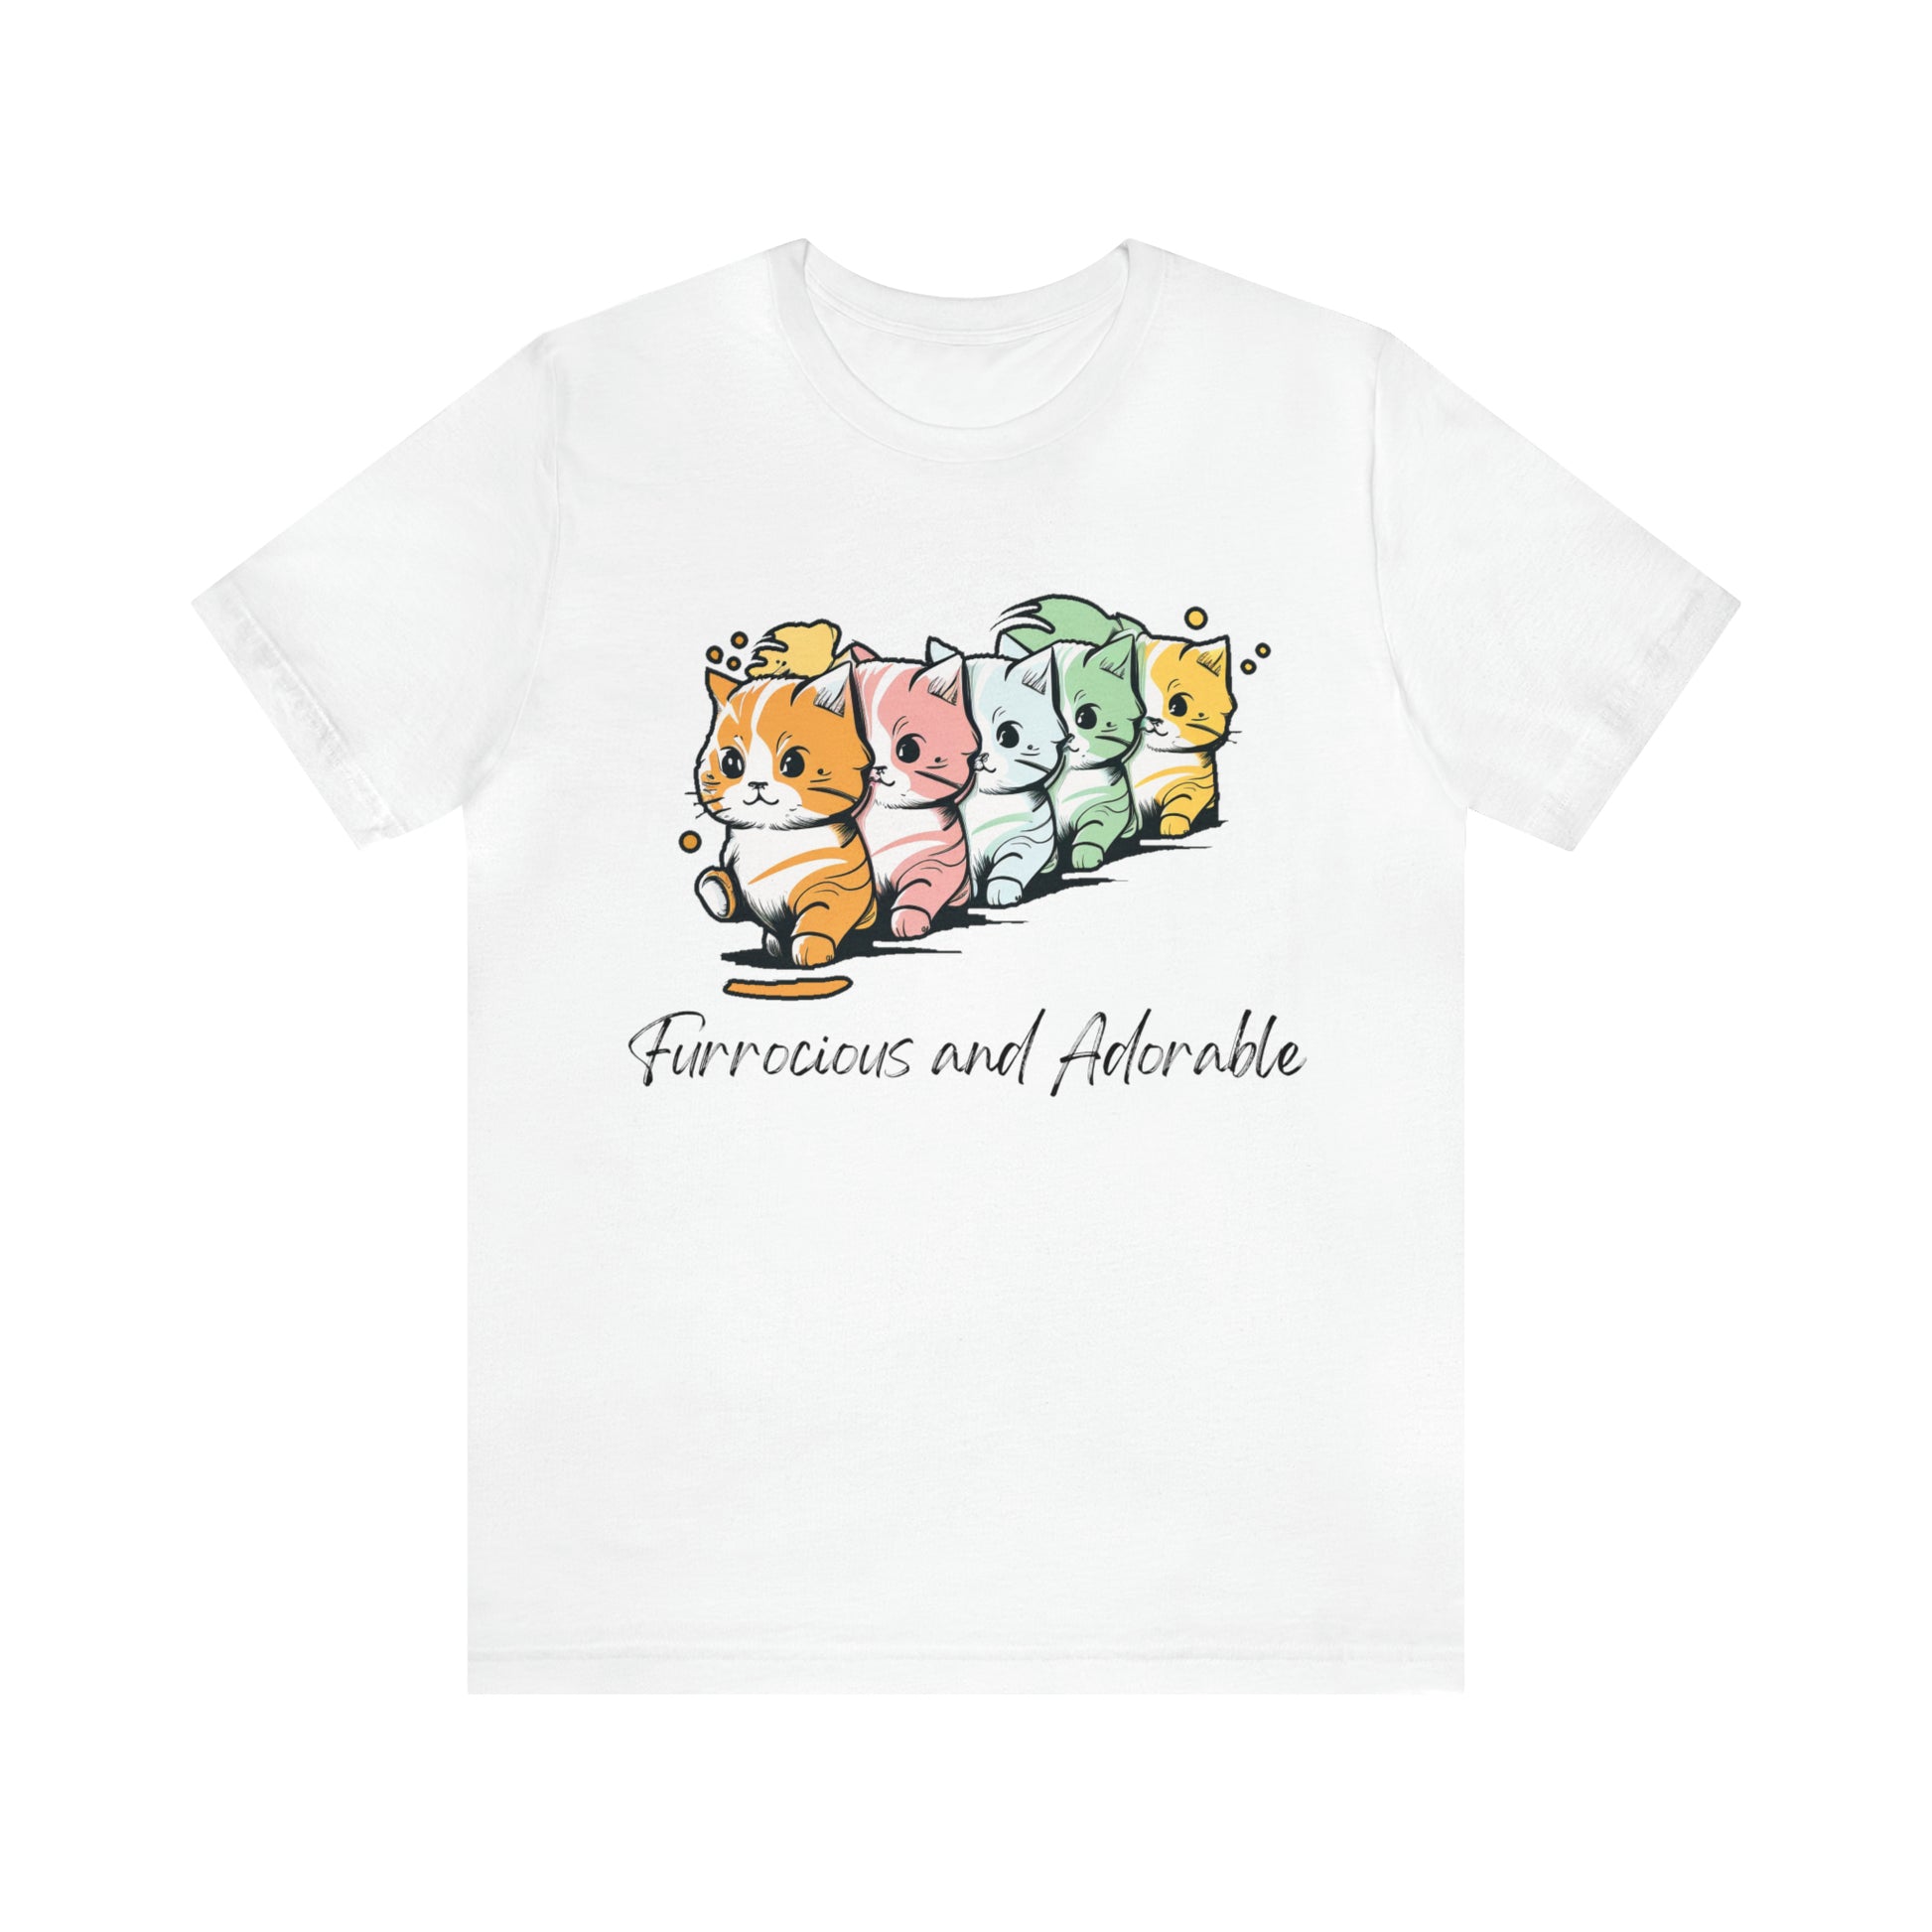 psychedelicBRANDz's Psychedeli-Cute Clawdyssey featuring five cute kittens on a white shirt